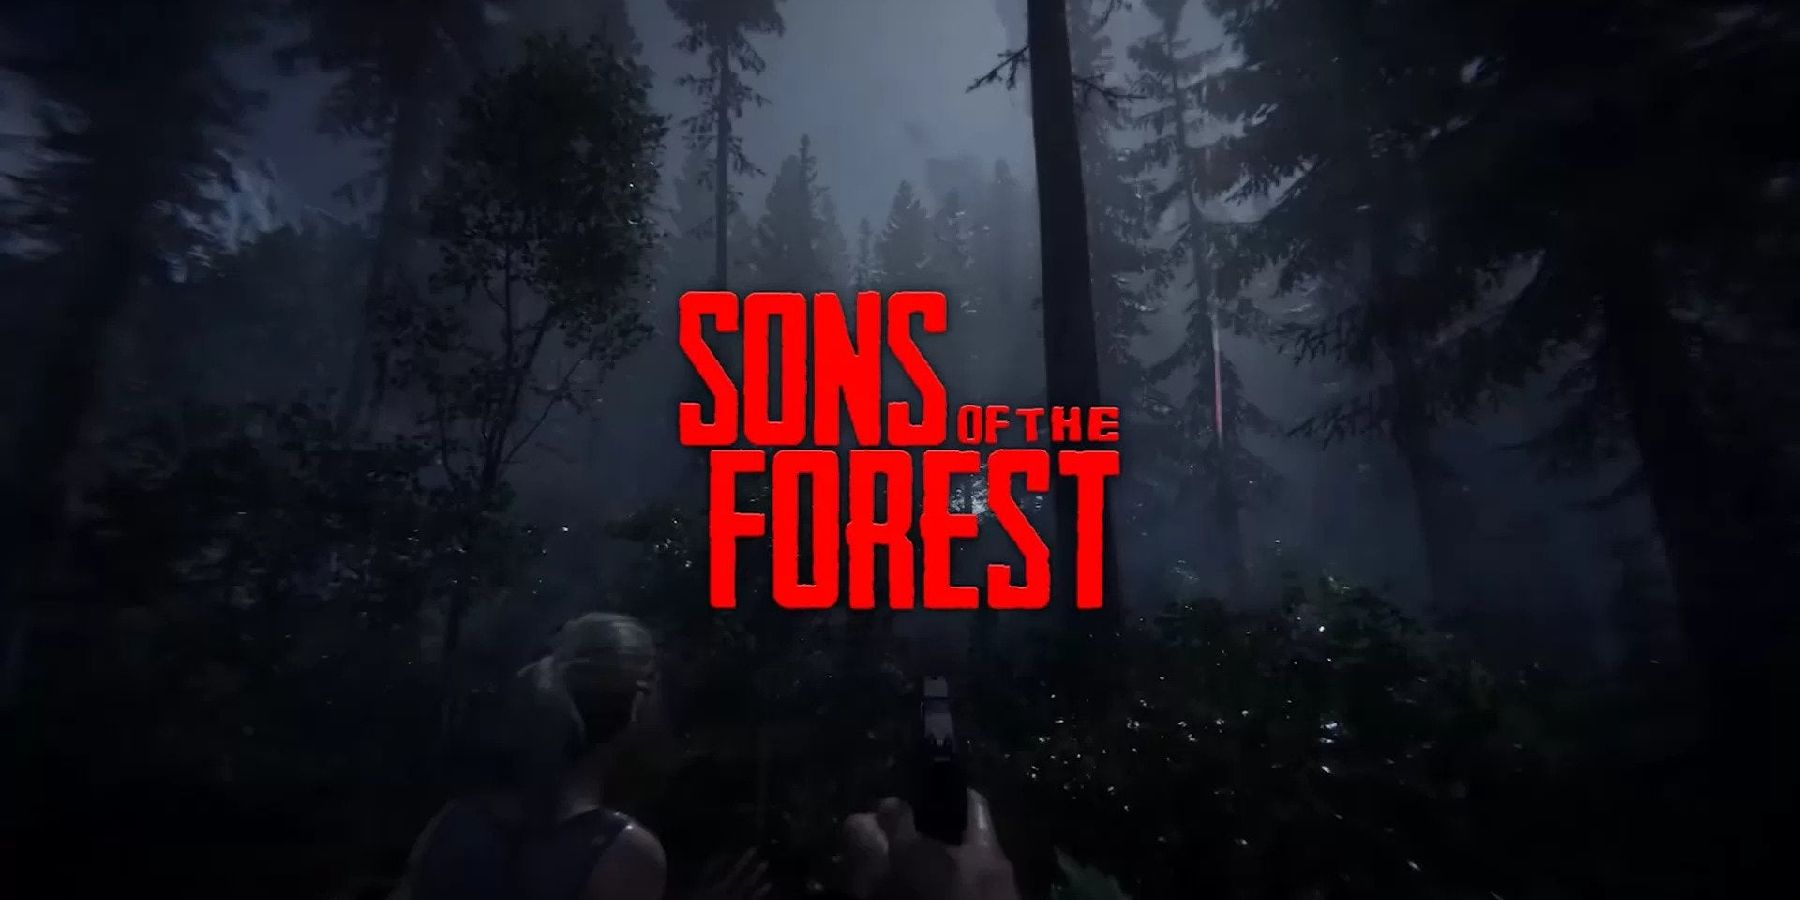 February 22 is a Big Day For Sons of the Forest